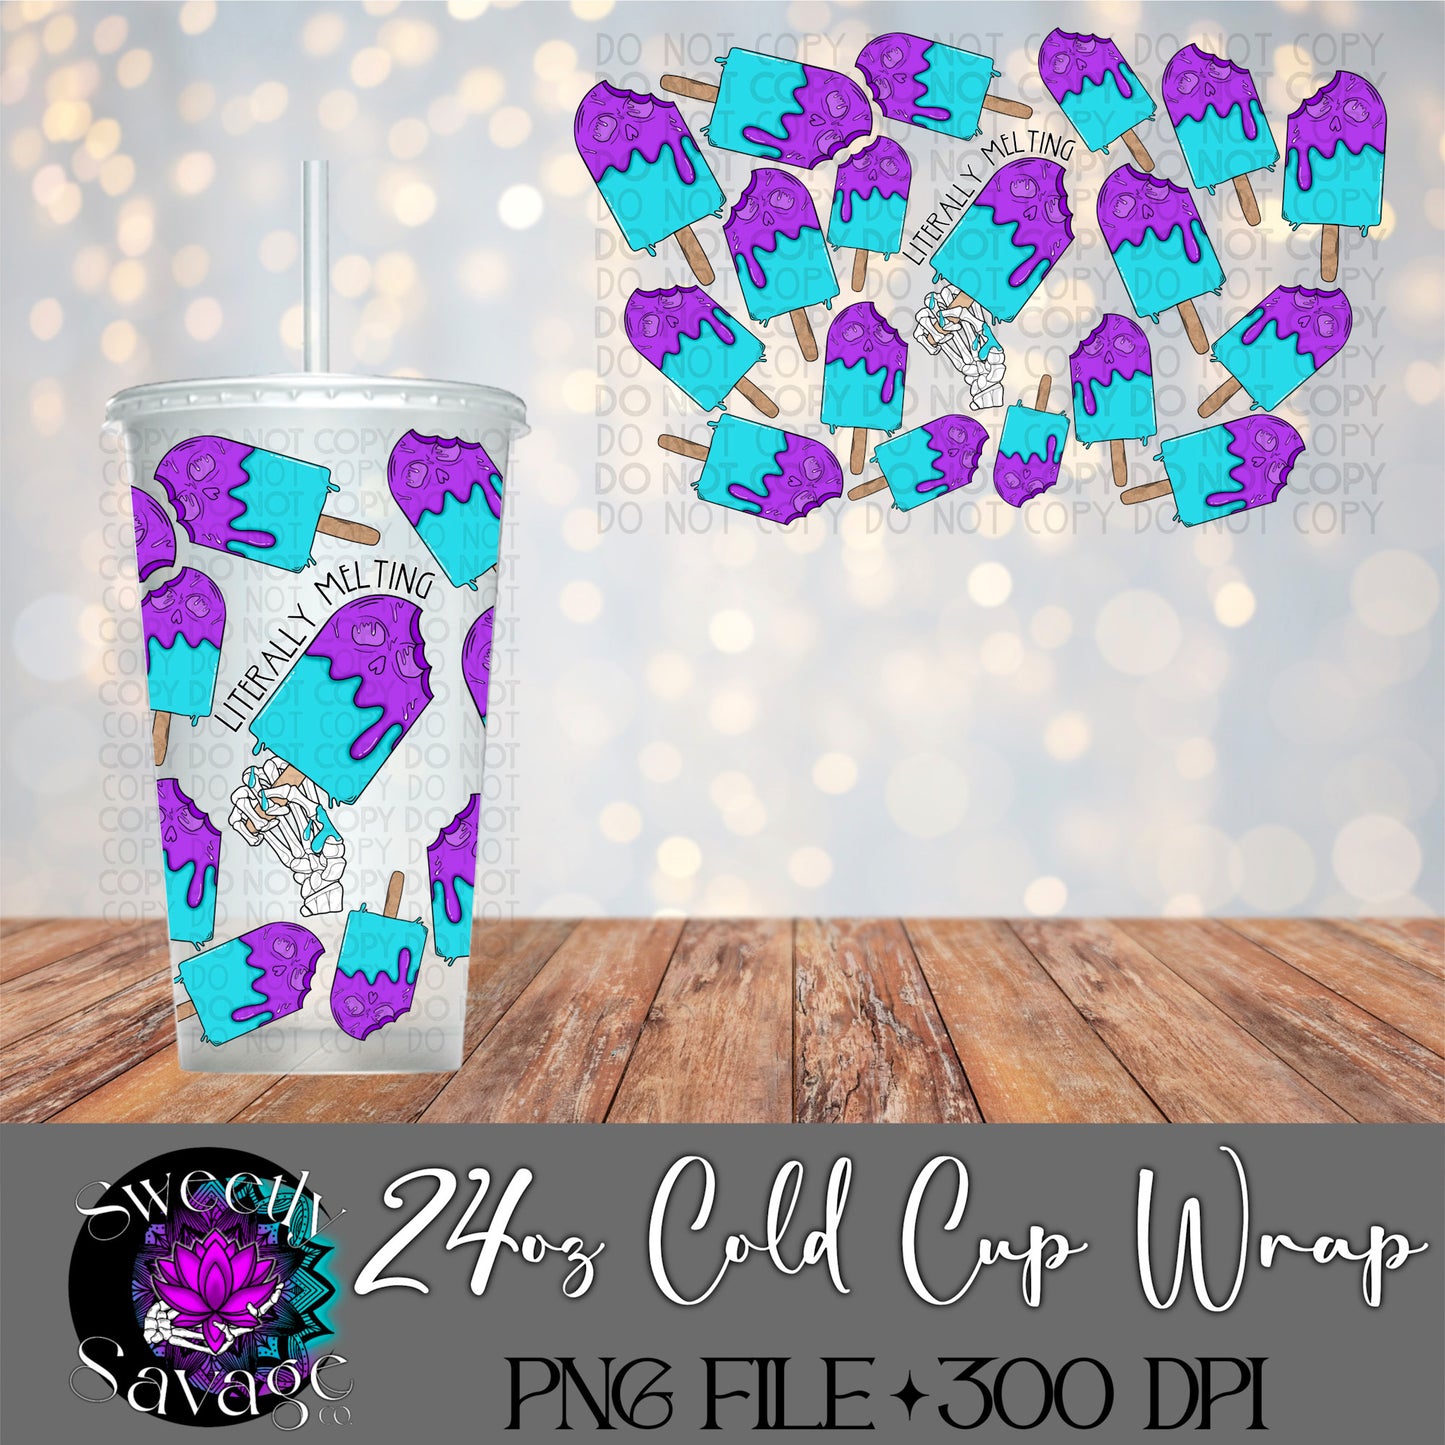 Literally melting Skellie popsicle 24oz Cold Cup wrap